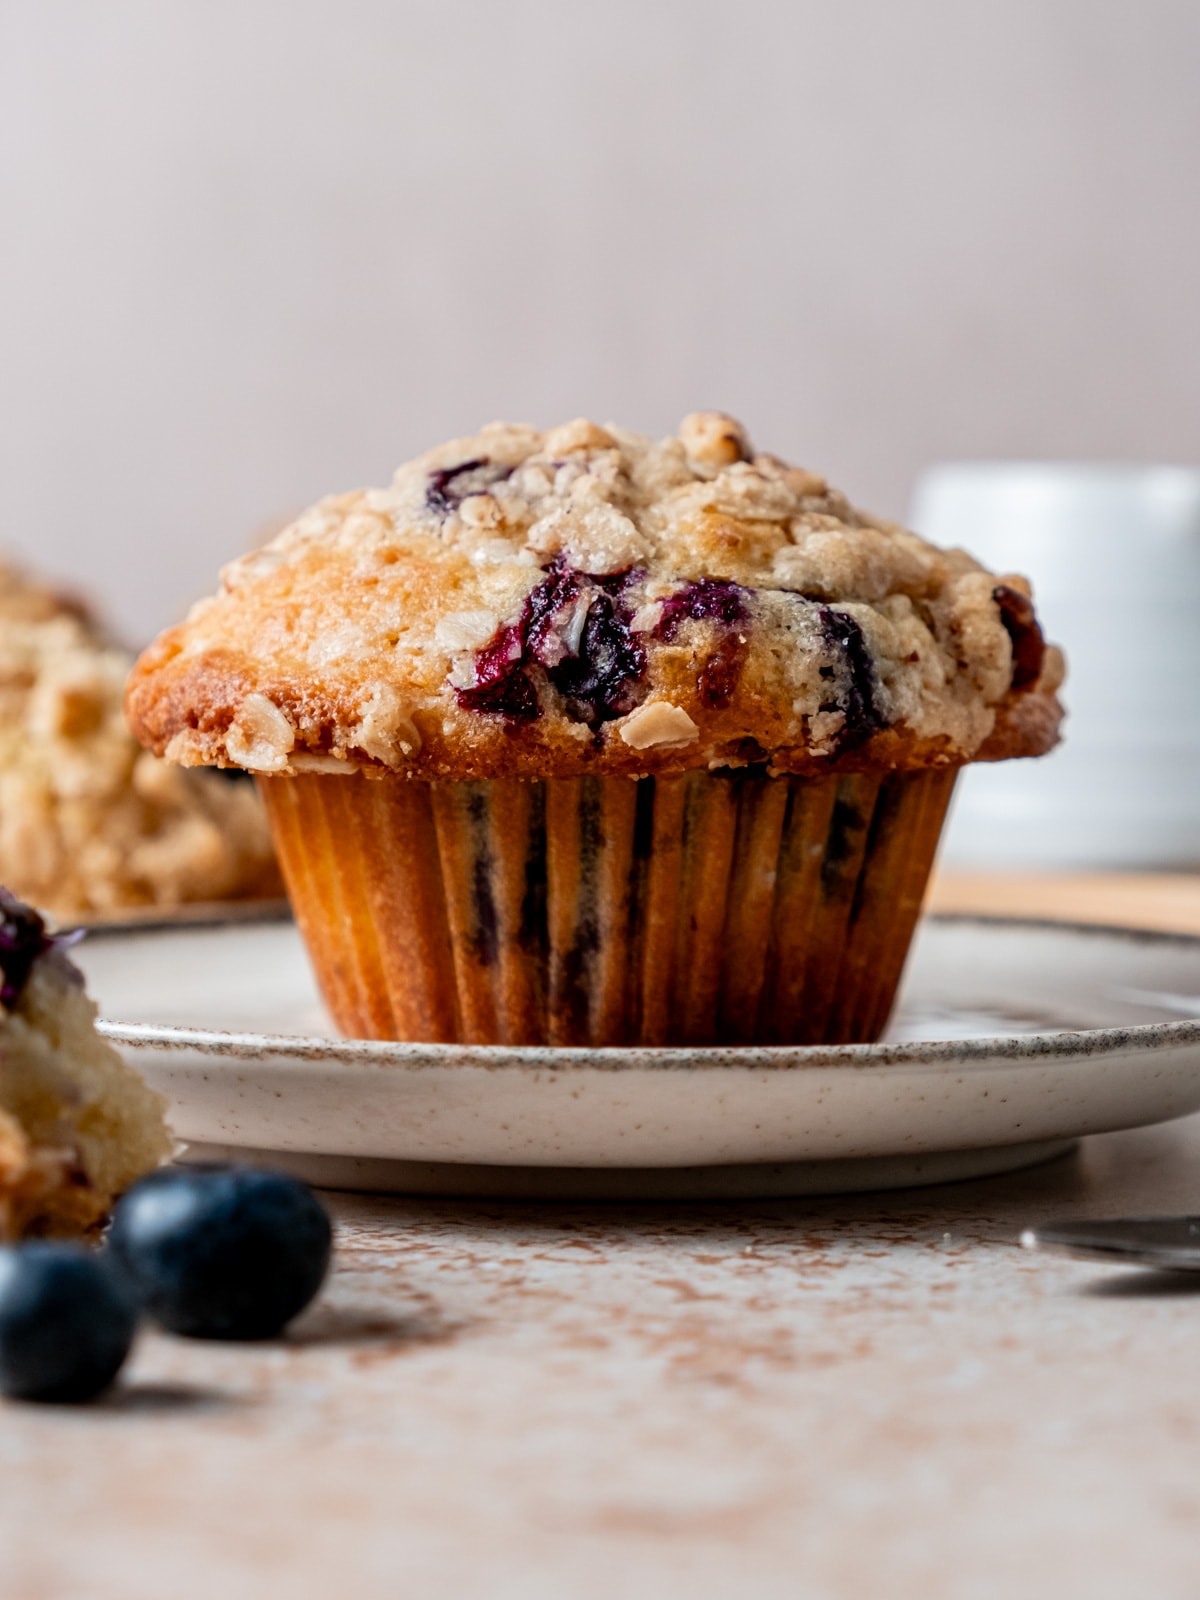 Close up of freshly baked blueberry muffin with pecan oat streusel.